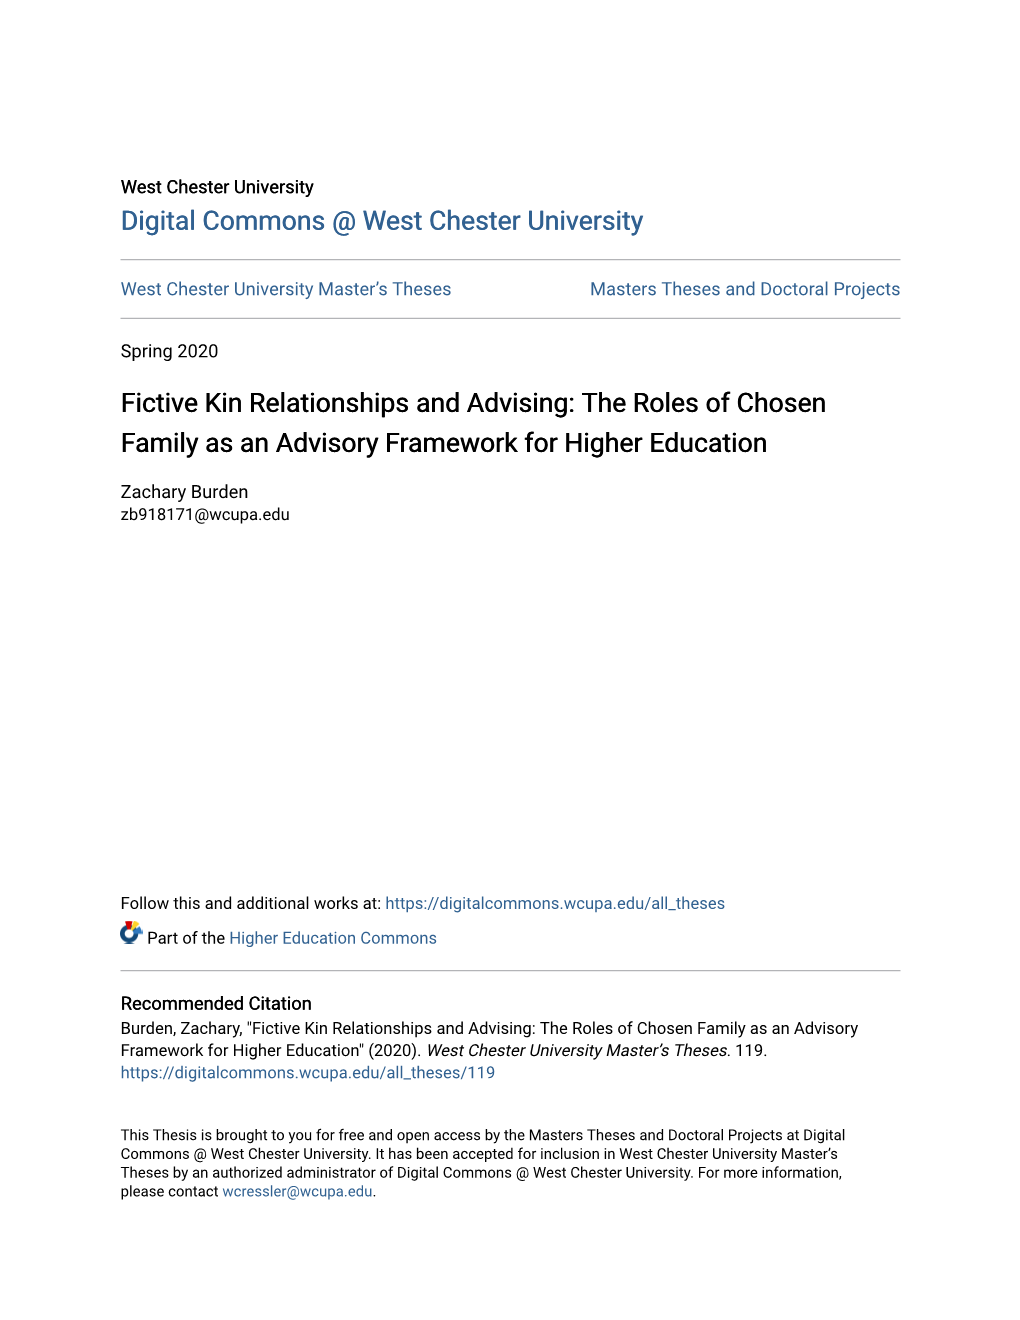 Fictive Kin Relationships and Advising: the Roles of Chosen Family As an Advisory Framework for Higher Education